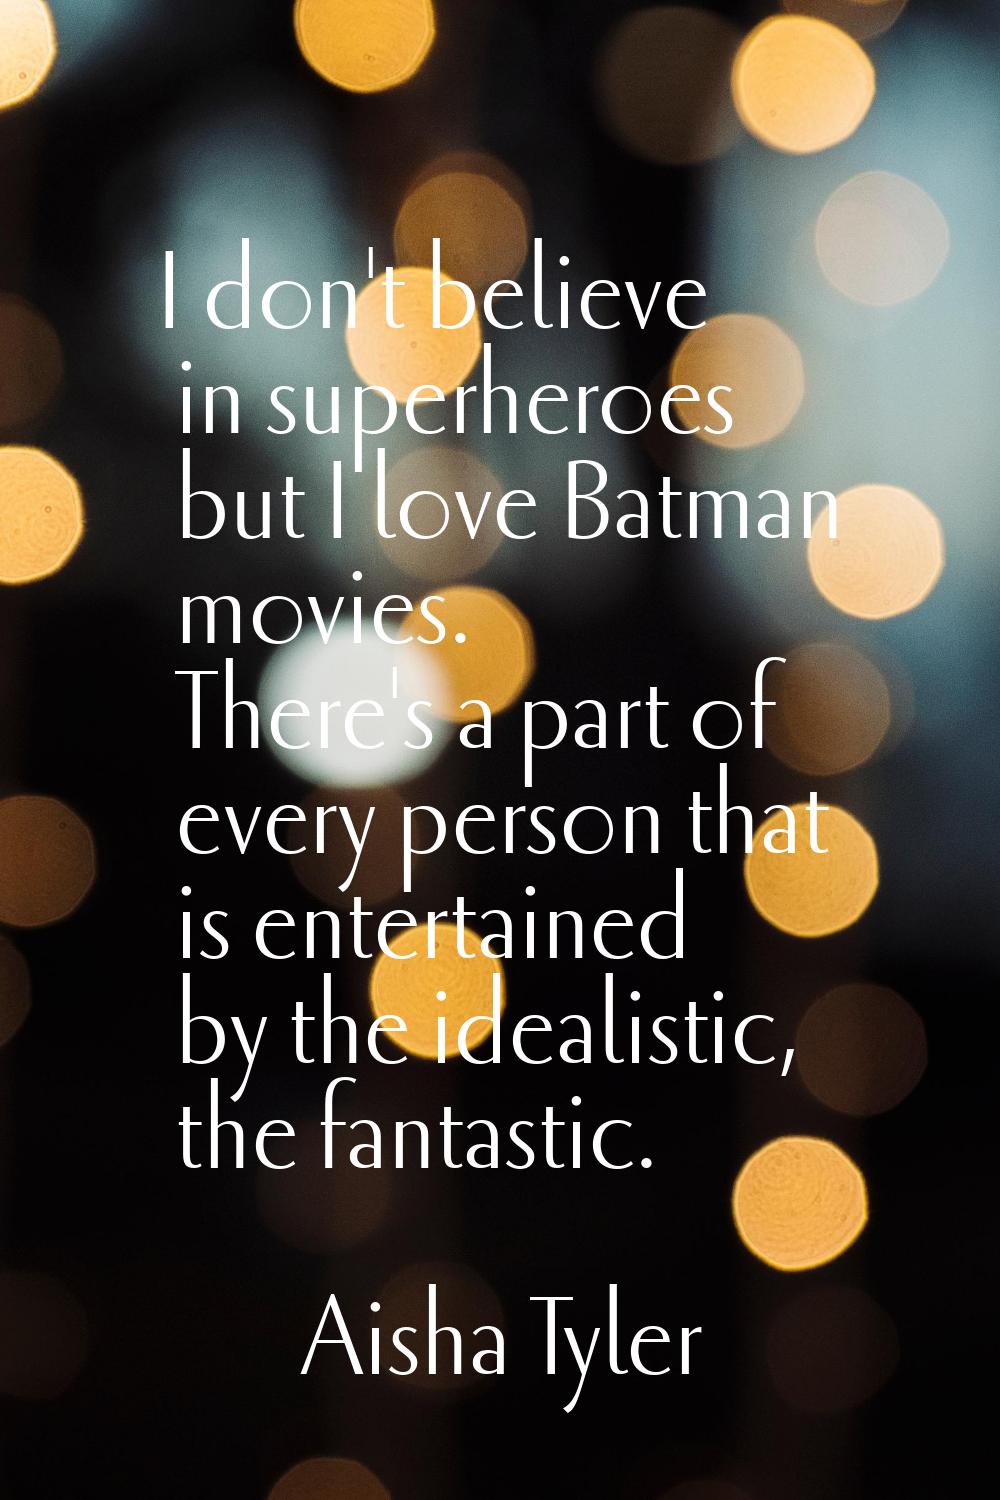 I don't believe in superheroes but I love Batman movies. There's a part of every person that is ent